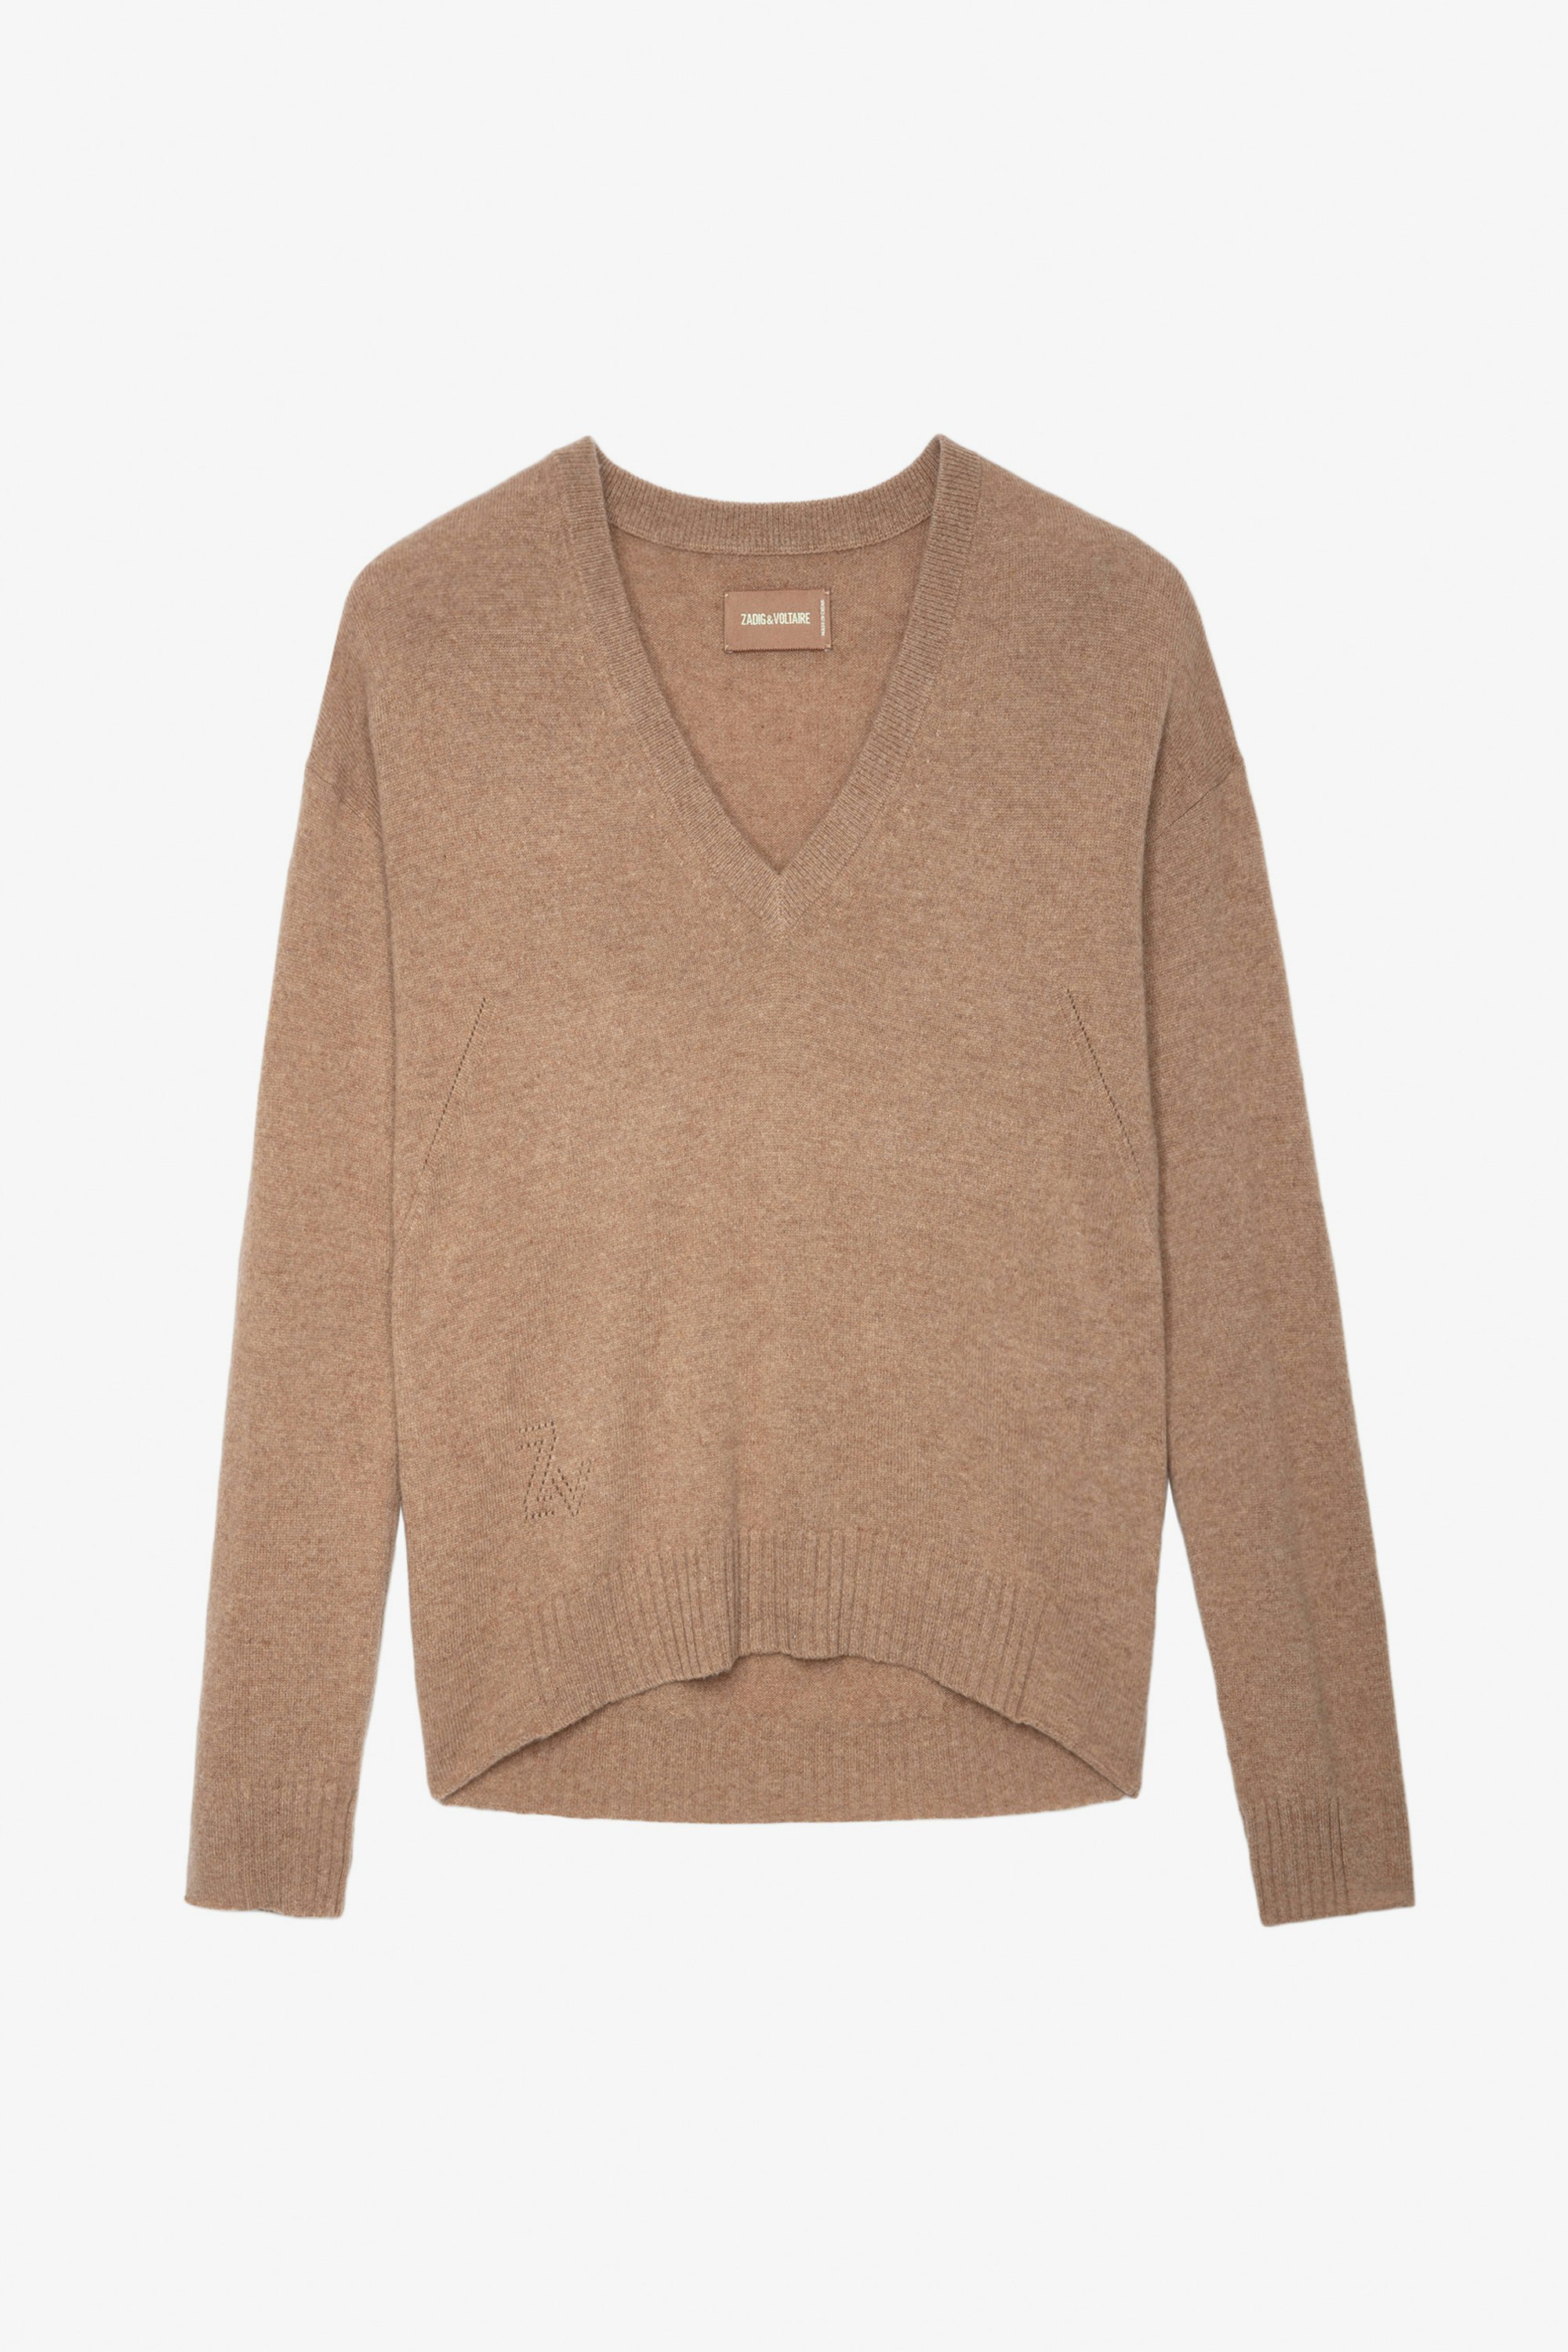 Vivi Patch Cashmere Sweater - Women’s camel cashmere sweater with star patches on the elbows.